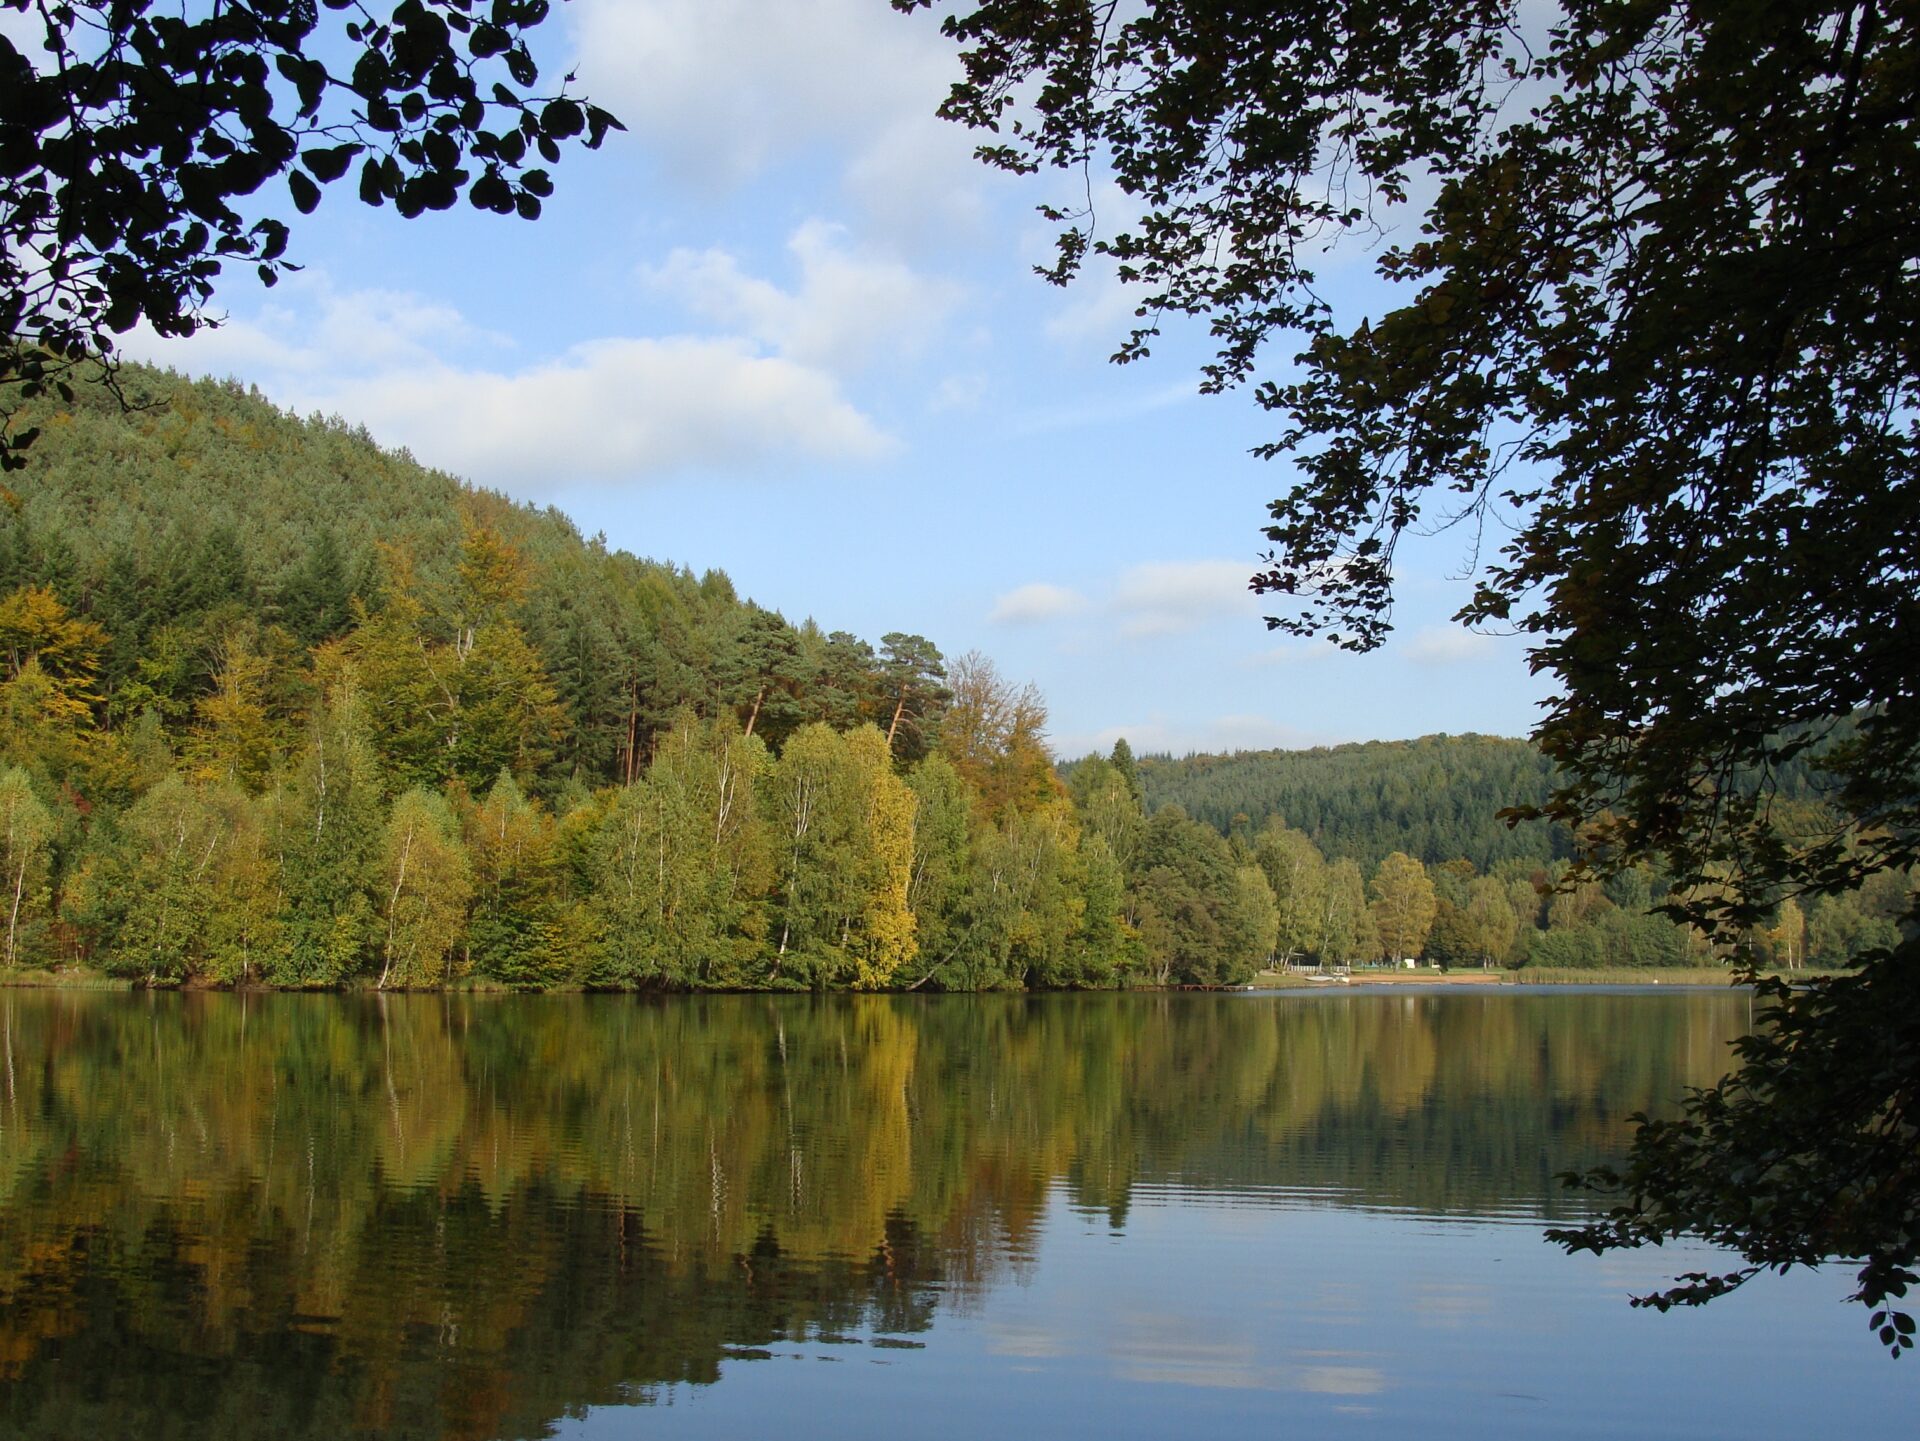 A serene lake reflecting the surrounding forest under a blue sky with silhouettes of leaves in the foreground.